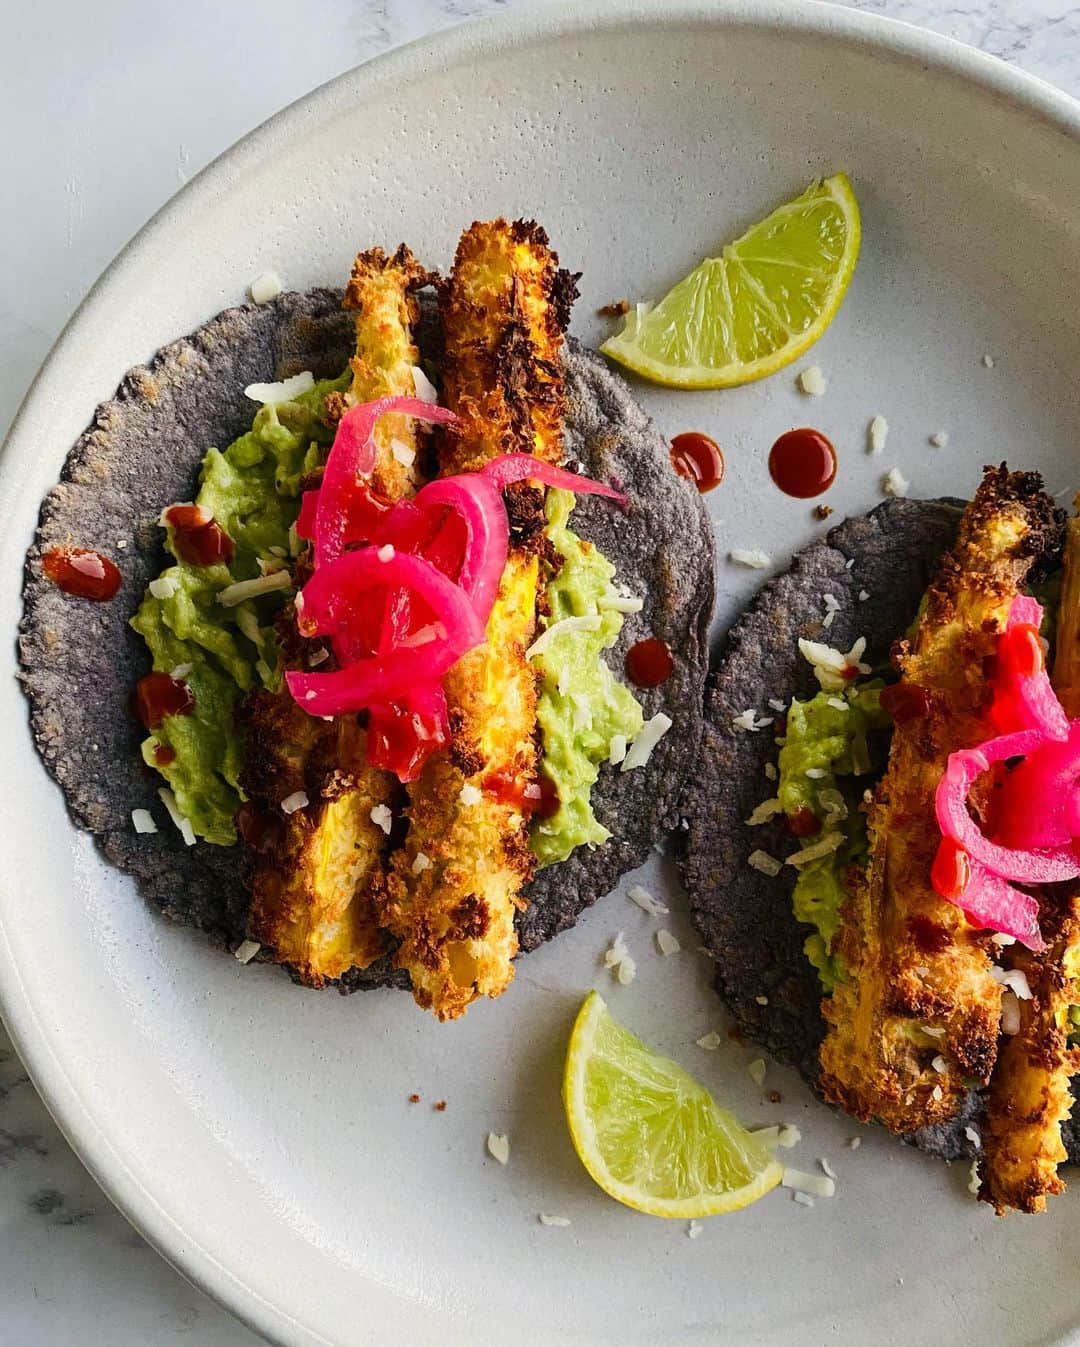 Antonietteのインスタグラム：「Over día de la Madre, I opted for a “masa”ge instead of a massage which worked out since I love tacos! 🌮 Used @masienda blue corn masa harina to make these crispy tacos de calabacitas with guacamole and pickled red onions. Fresh tortillas are always sooo good! Recipe for zucchini and pickles ⬇️ below:   1 medium zucchini cut into ½" sticks 1 egg beaten cooking spray 1 cup panko bread crumbs ⅓ cup cotija  cheese 1 teaspoon cumin  ———————————- Preheat air fryer to 400°F. Mix coating ingredients in a bowl Toss zucchini with egg. Dip zucchini into the coating mixture gently pressing to adhere. Lightly spray zucchini with cooking spray. Place in a single layer in the air fryer 6-8 minutes. Turn zucchini over and air fry 6-8 minutes more or until crisp. The timing will vary on your air fryer.   Pickled red onions  ———————————-  1 red onion peeled and thinly sliced 4 limes juiced 1 Tablespoon vinegar 1 teaspoon salt ½ teaspoon pepper Mix and let mixture steep for 30 minutes or so.」